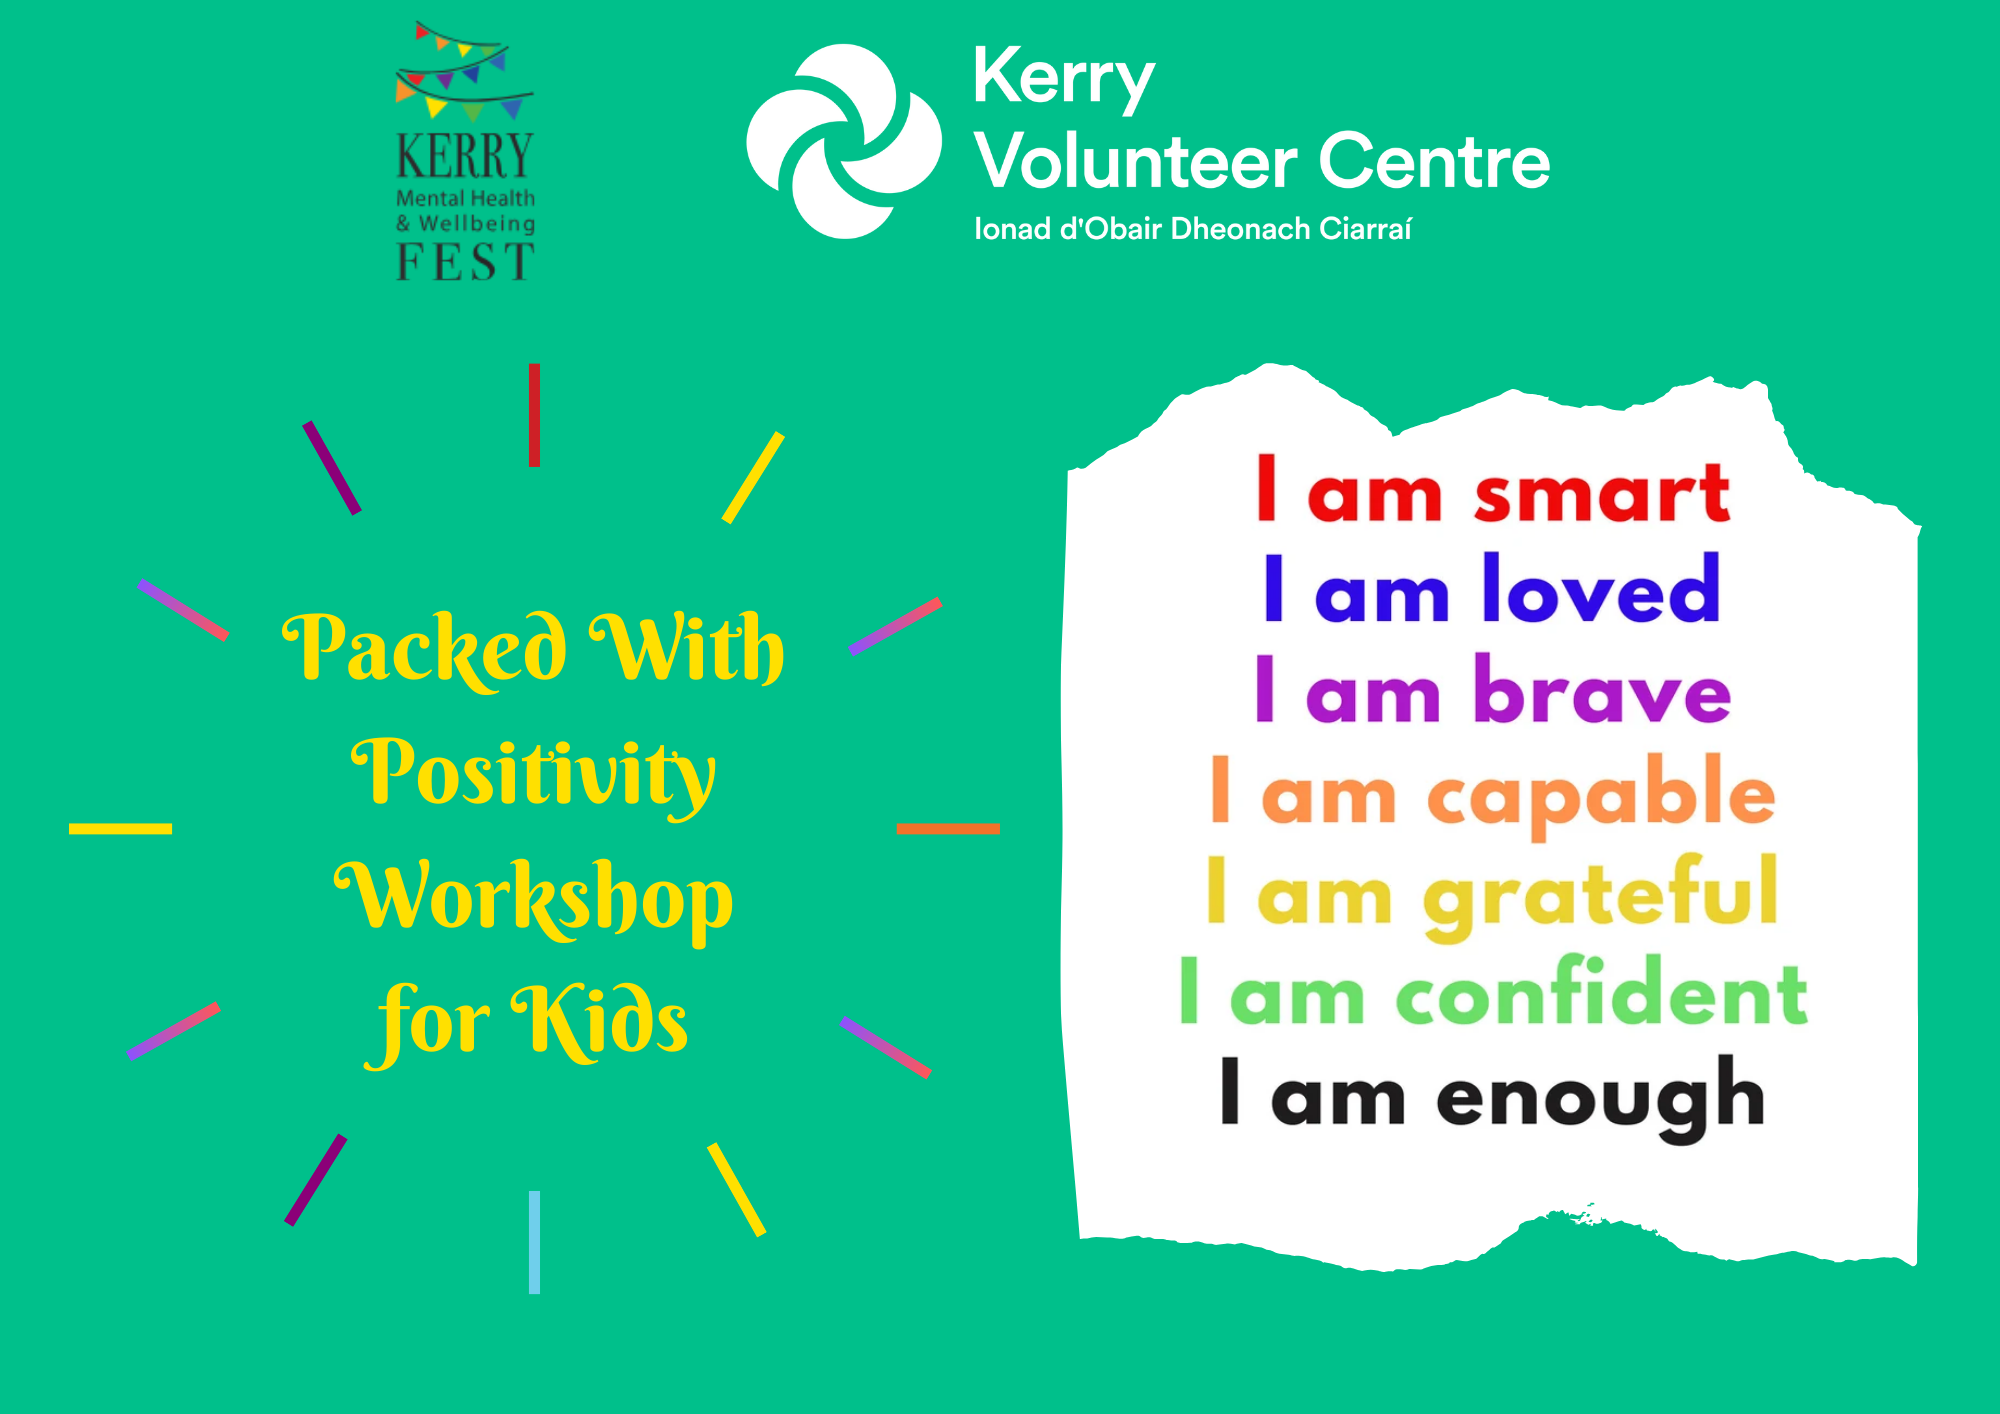 Packed With Positivity -8 to 12 year olds event at Kerry Mental Health & Wellbeing Fest 2022